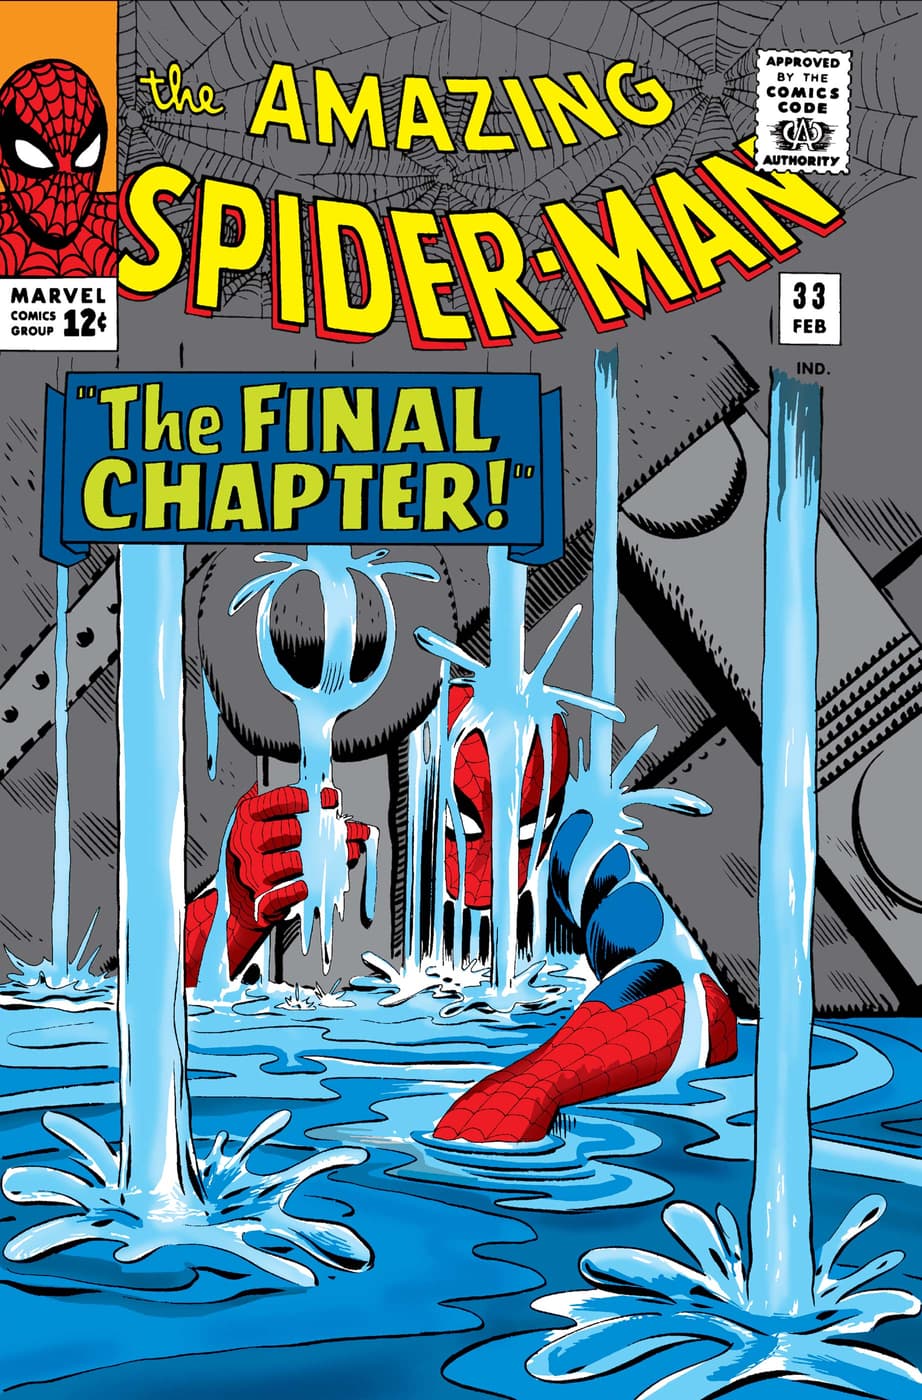 THE AMAZING SPIDER-MAN (1963) #33 cover by Steve Ditko